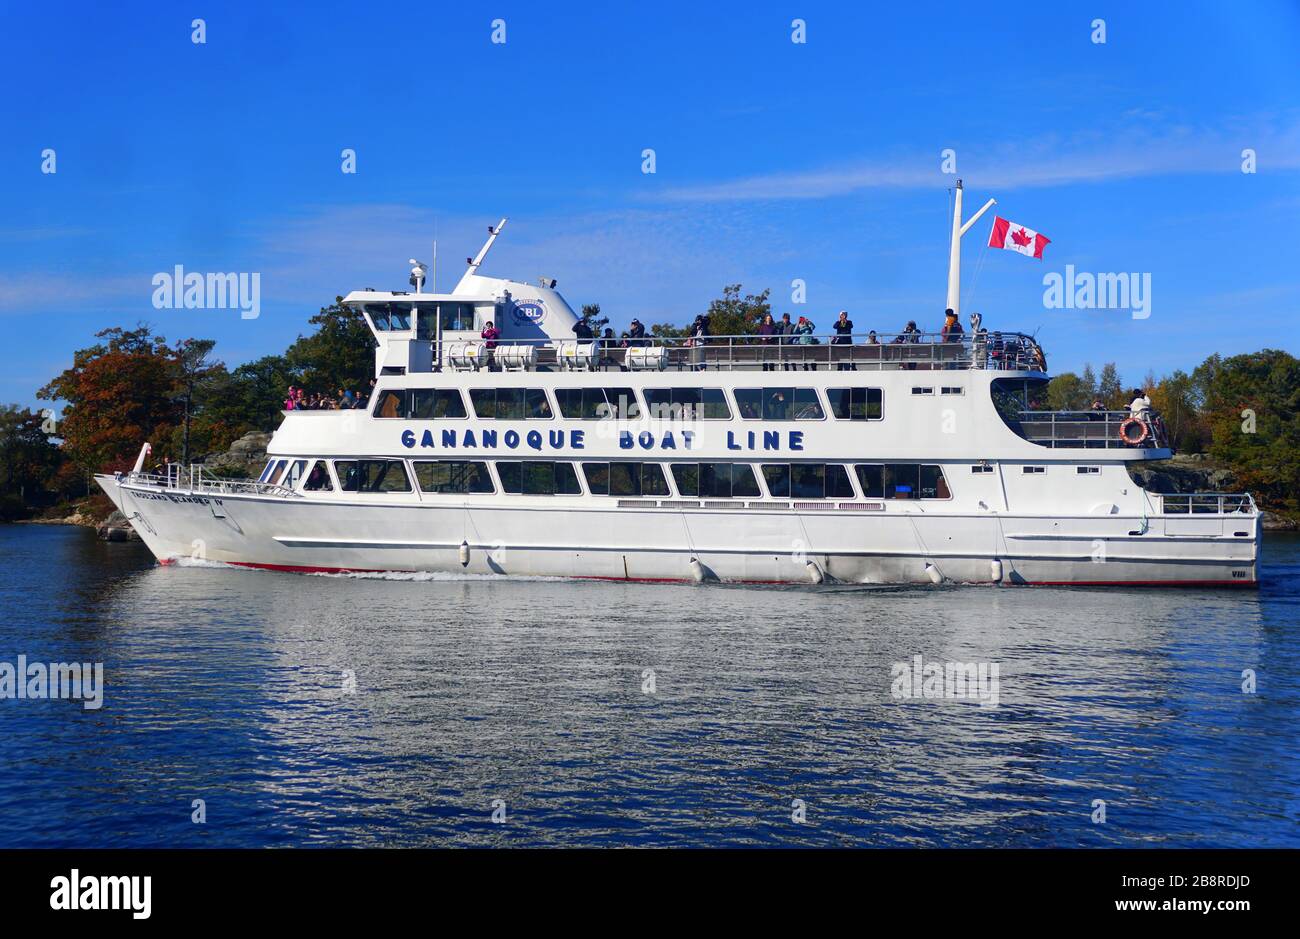 Alexandria Bay, New York, U.S.A - October 24, 2019 - The Gananoque Boat Line with passengers passing by St Lawrence River and Thousands Islands Stock Photo